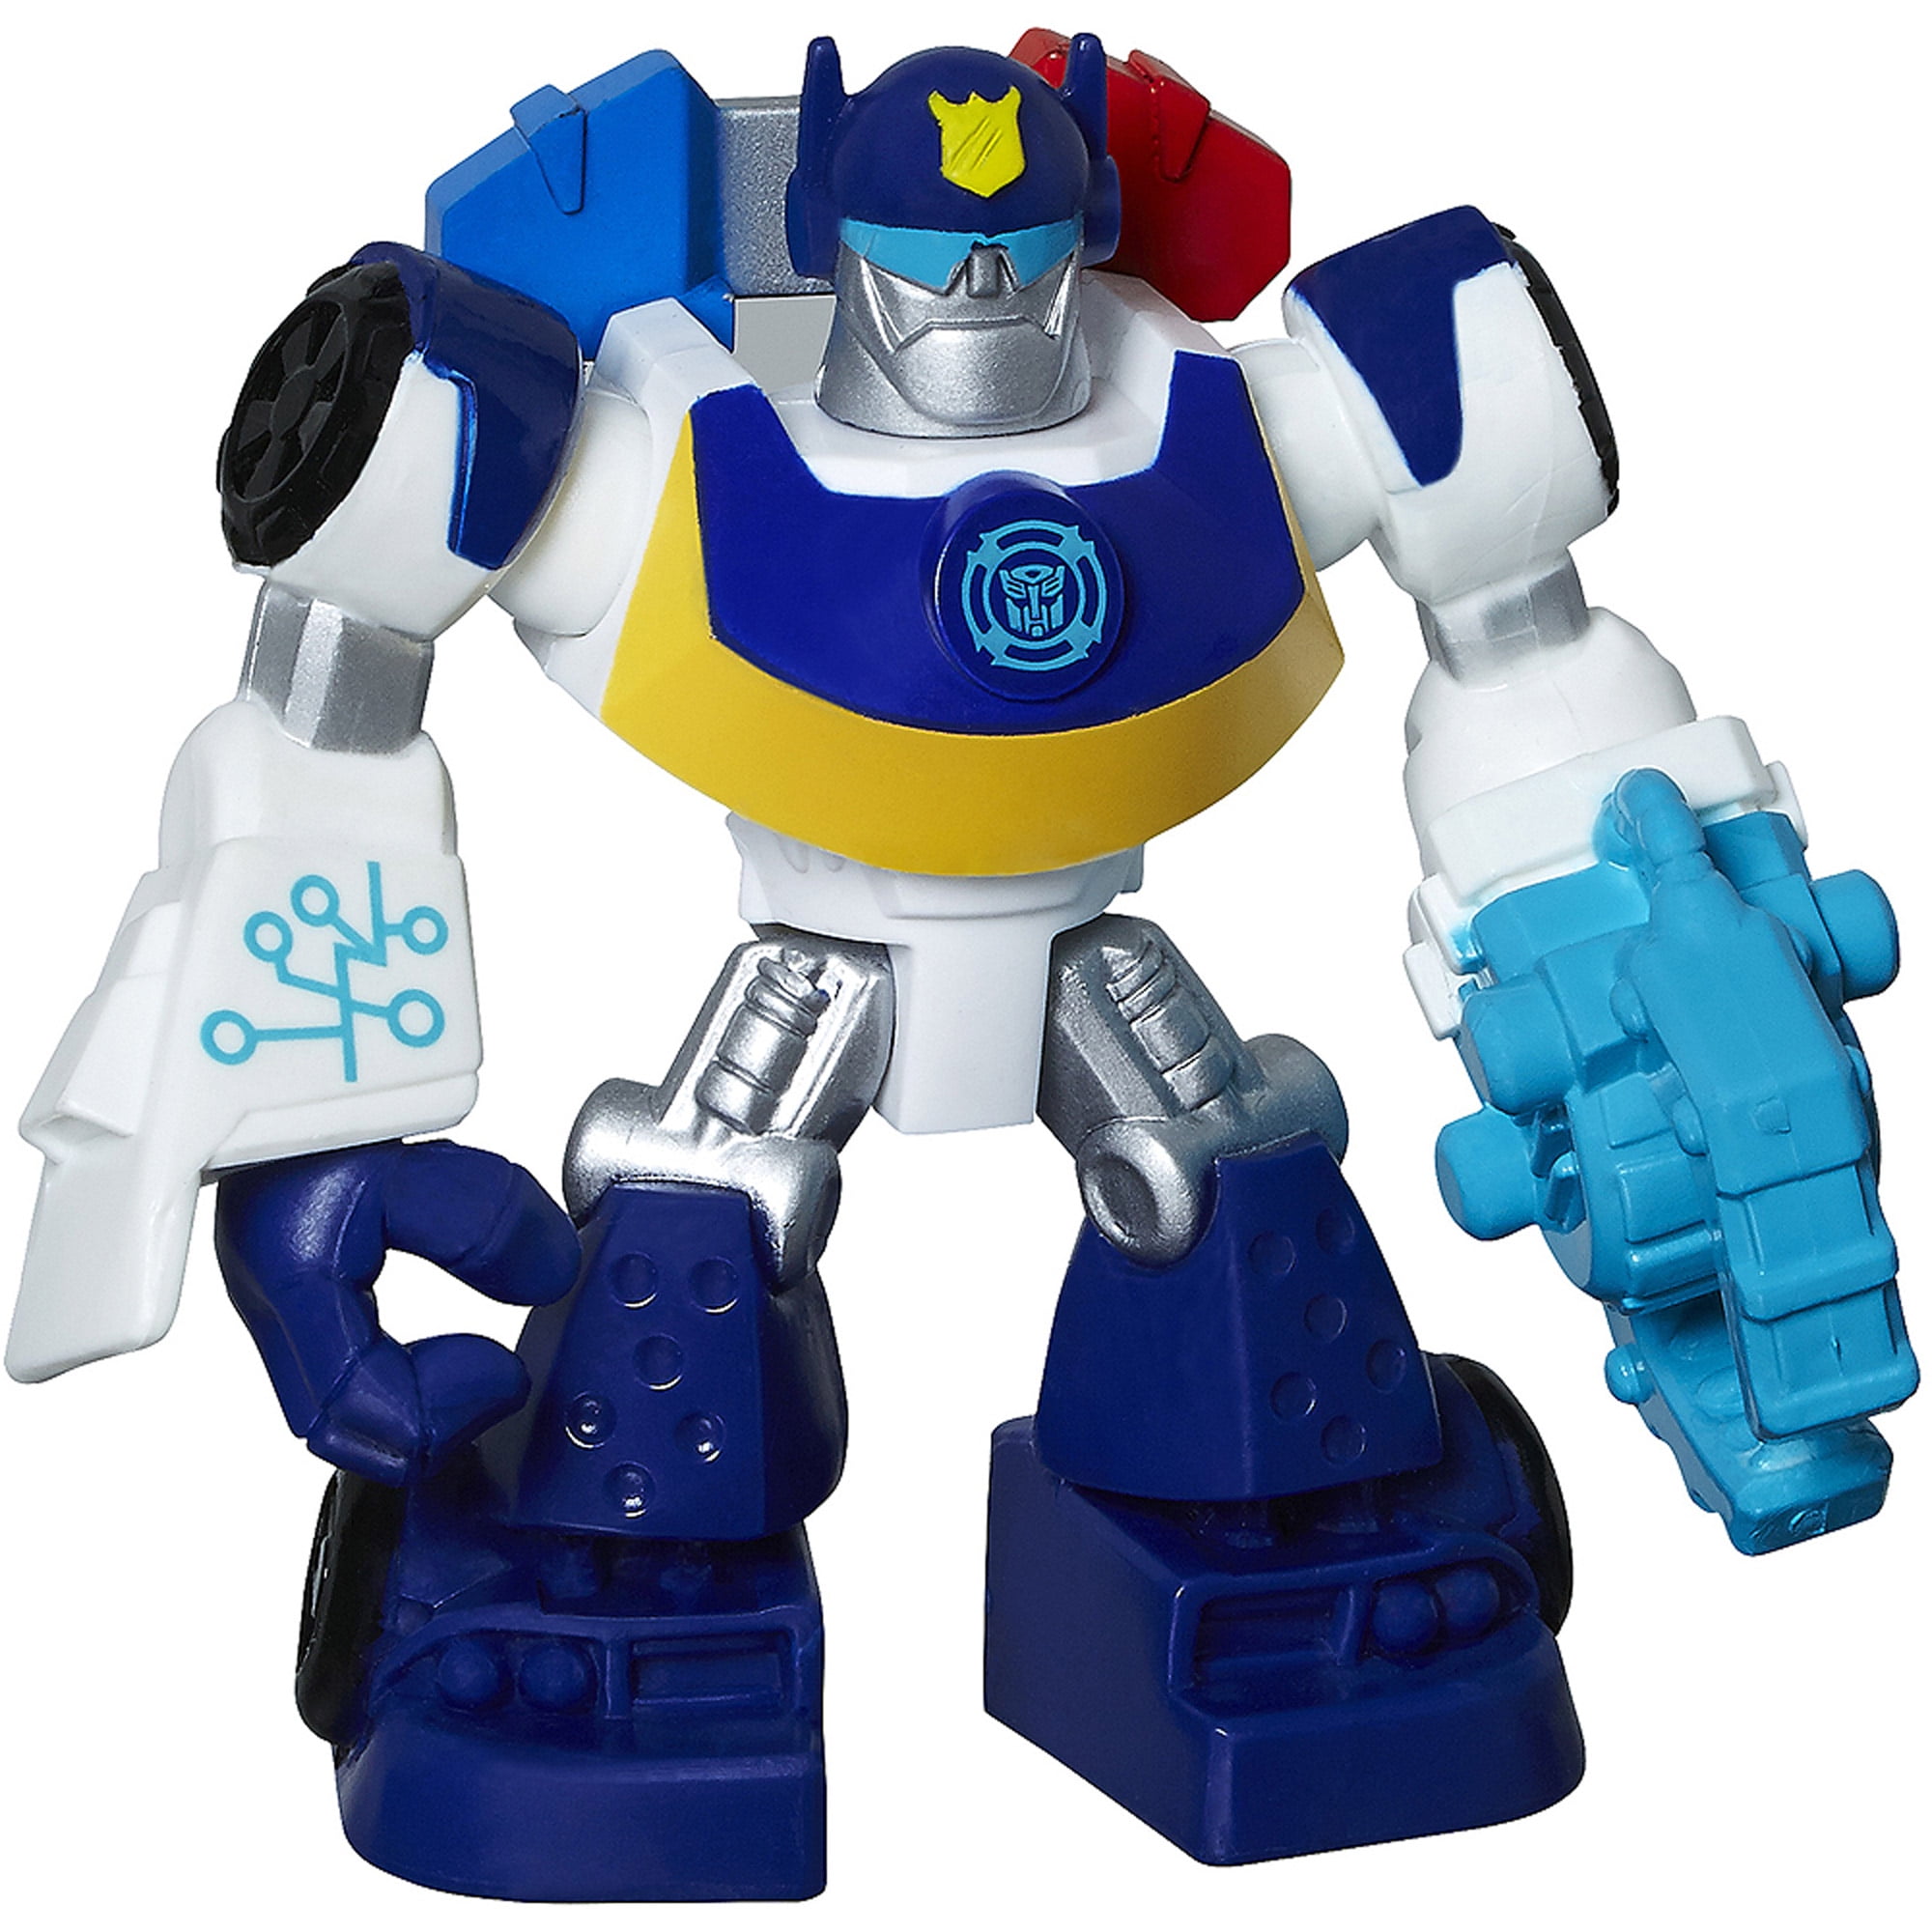 Transformers Playskool Rescue Bots Flip Changers Chase Police-Bot 12 inch 